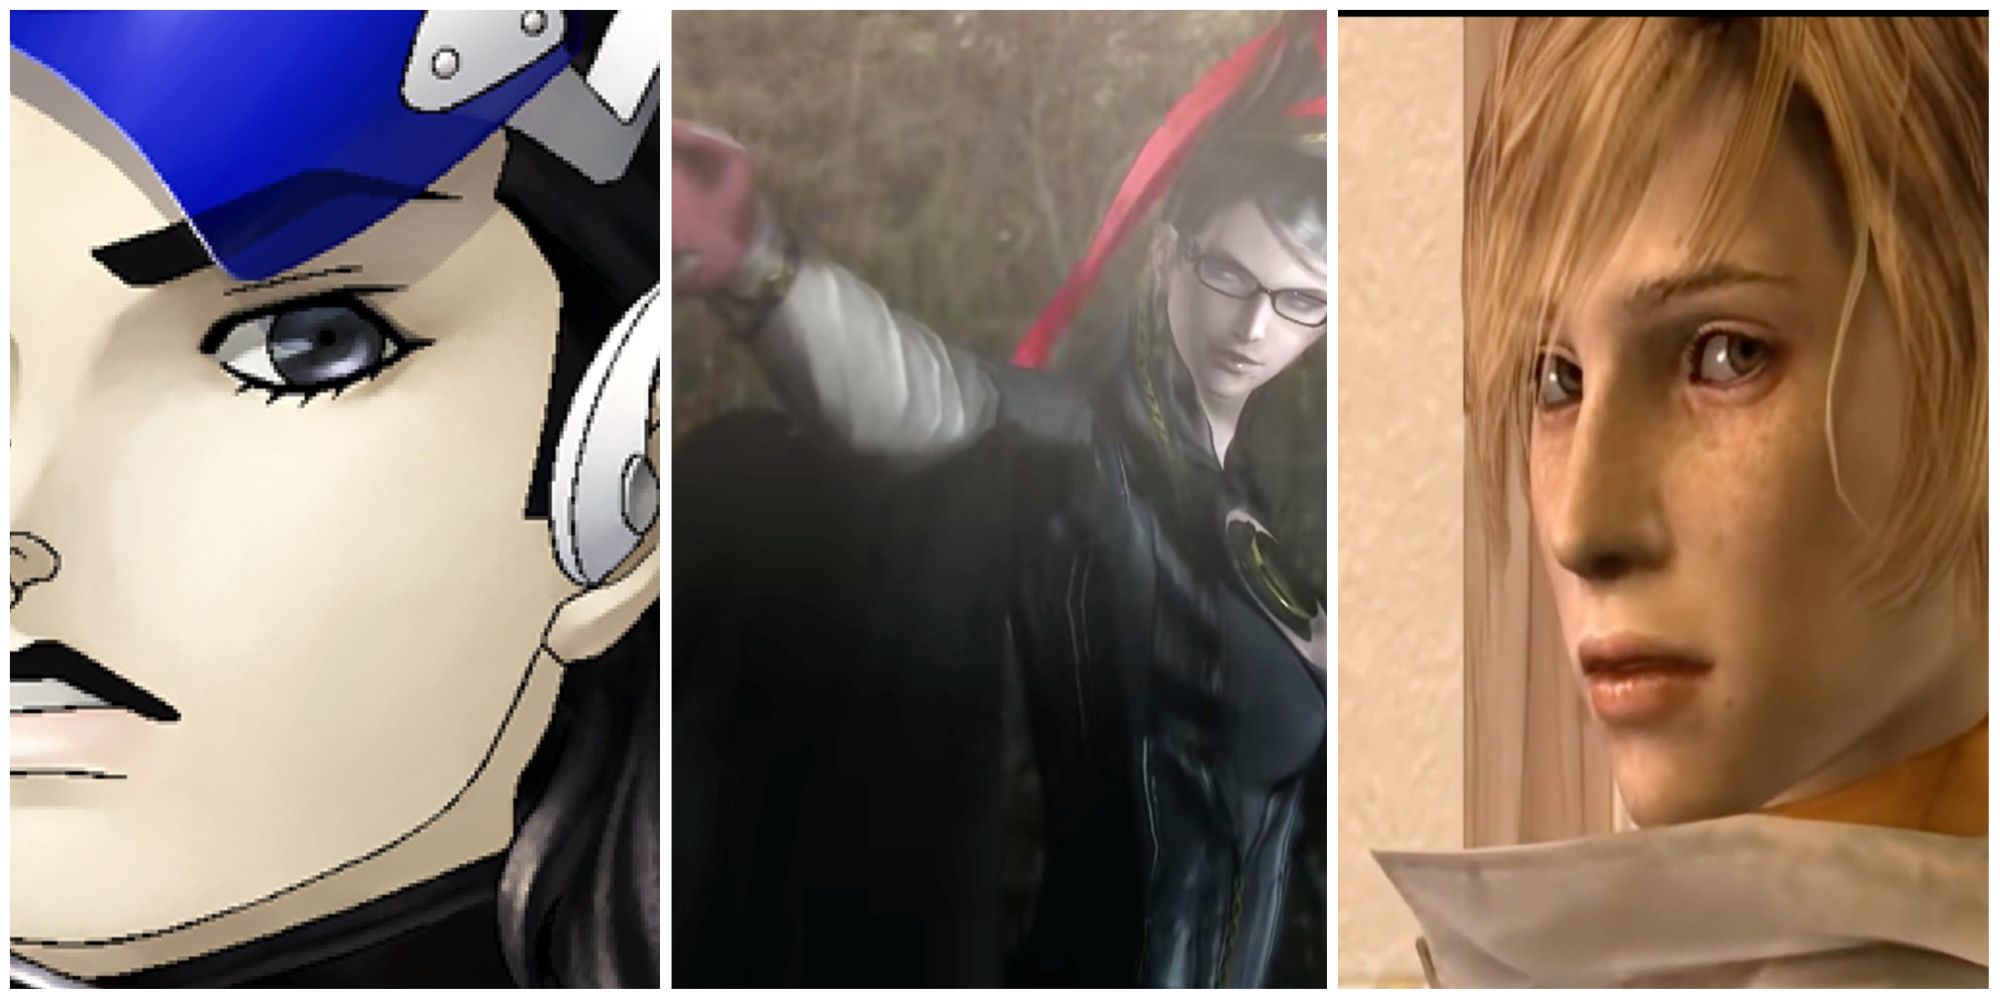 Memory Loss Protags Hawk left, Bayonetta middle Heather right